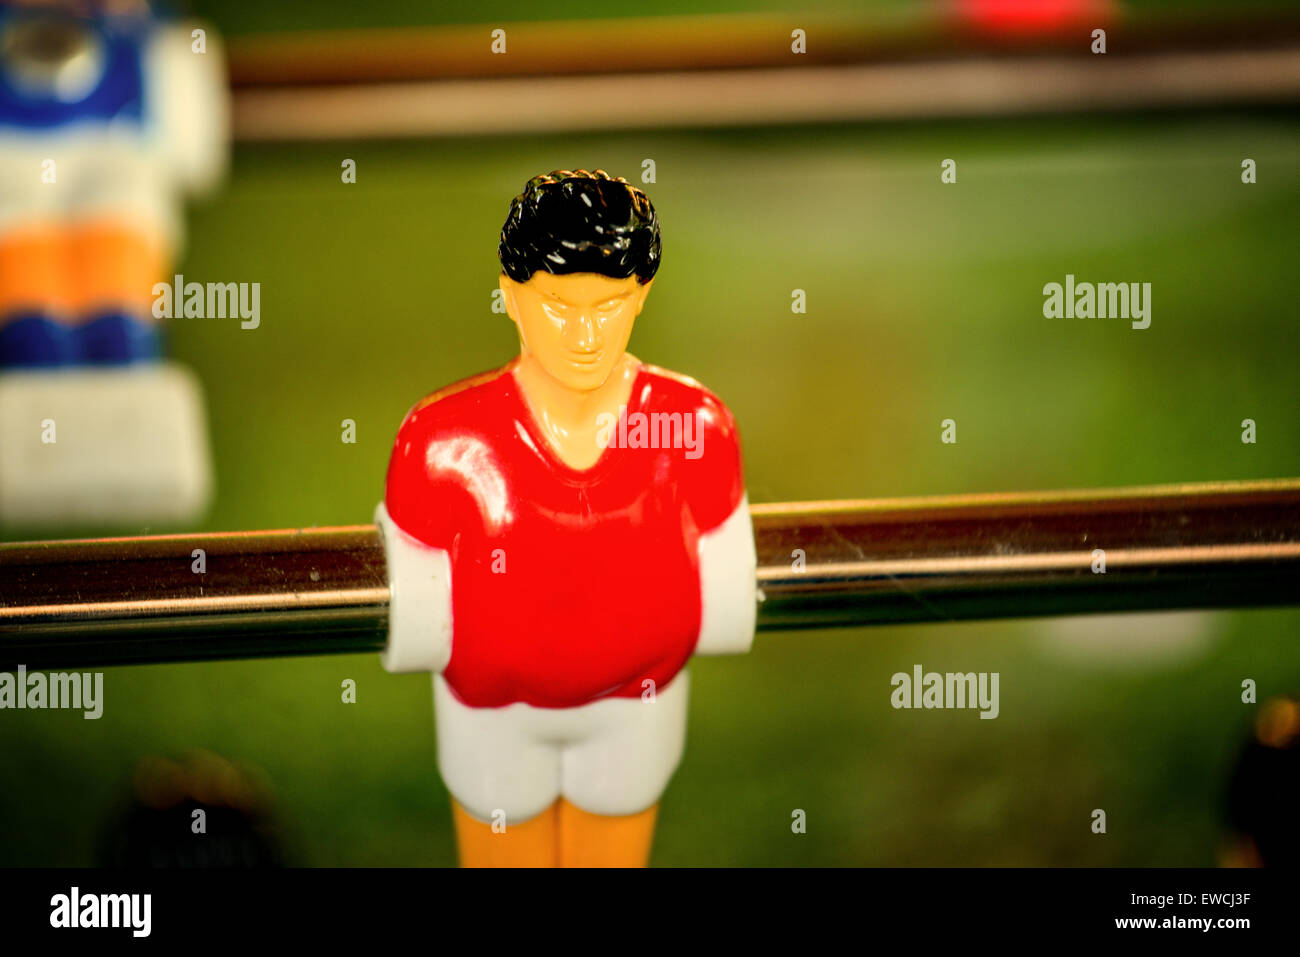 Single Player in Red Jersey, Vintage Foosball, Table Soccer or Football Kicker Game, Selective Focus, Retro Tone Effect Stock Photo